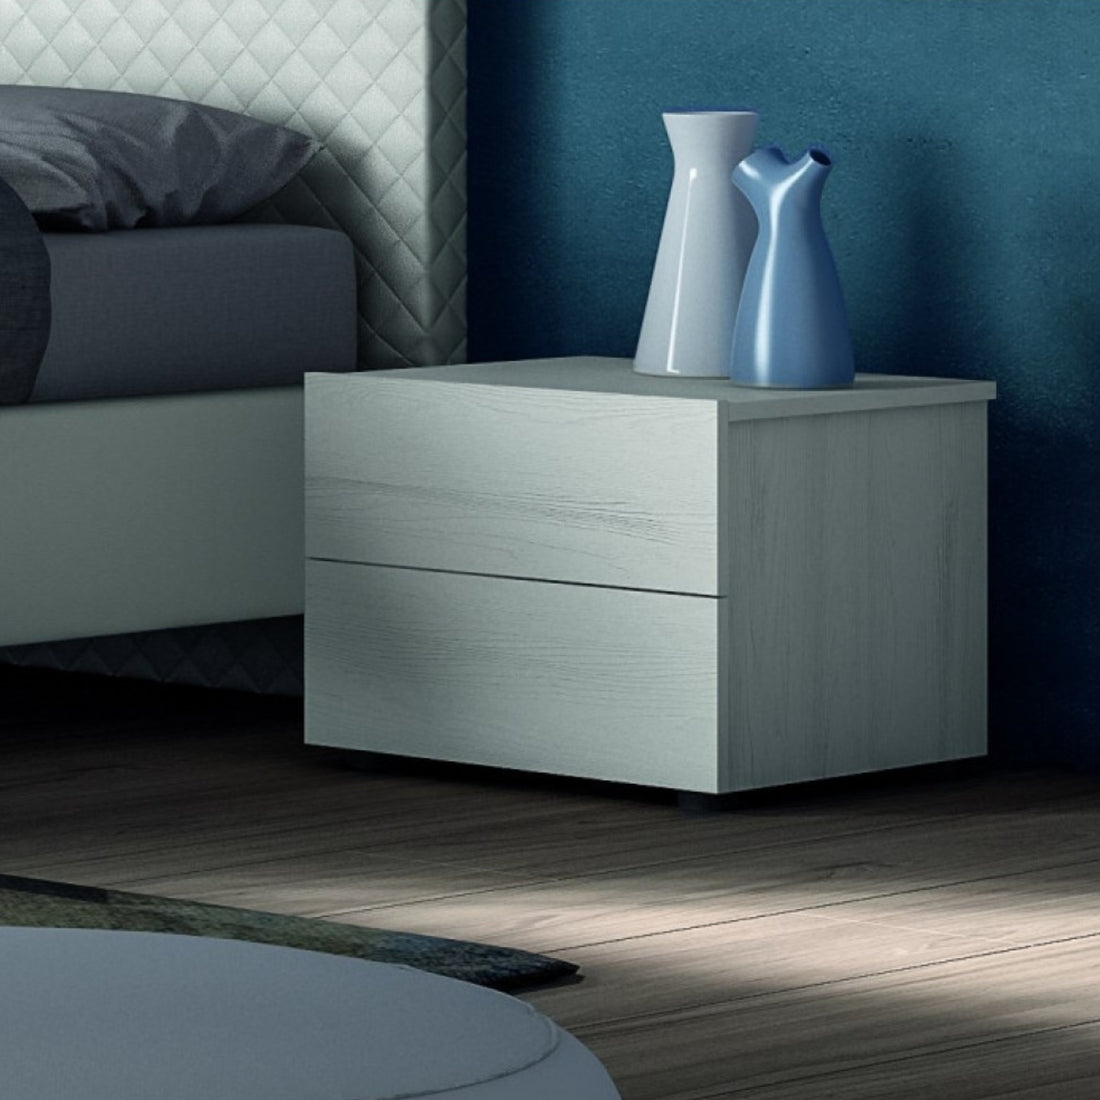 6 Arguments Why Bedroom Furniture Need Not Be Coordinated